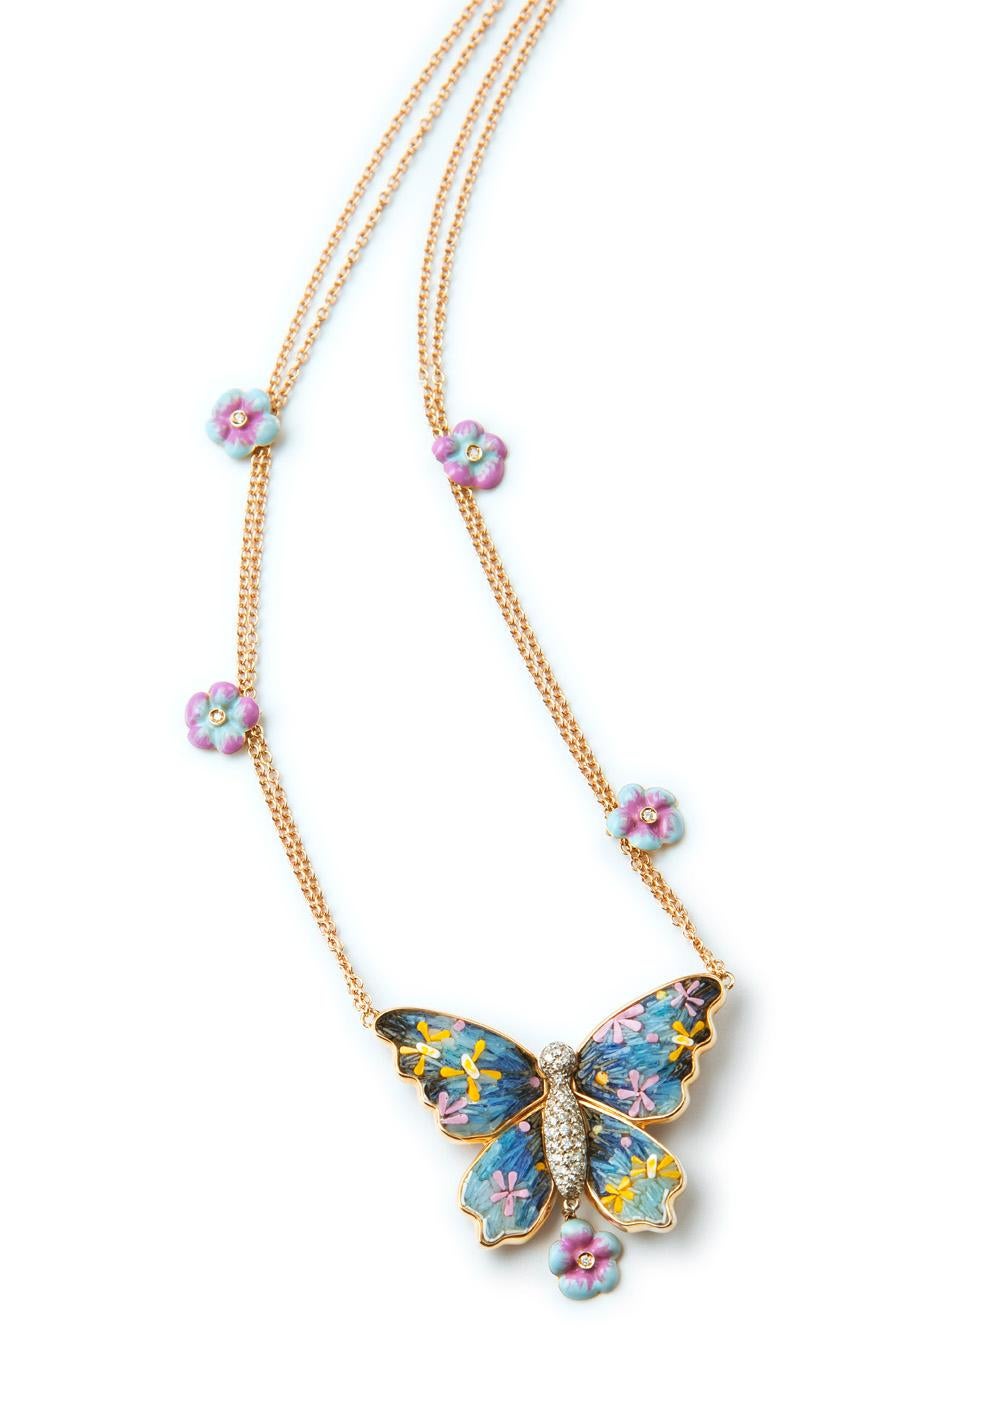 Brilliant Cut Necklace Yellow Gold White Diamonds Enamel Hand Decorated with Micro Mosaic For Sale